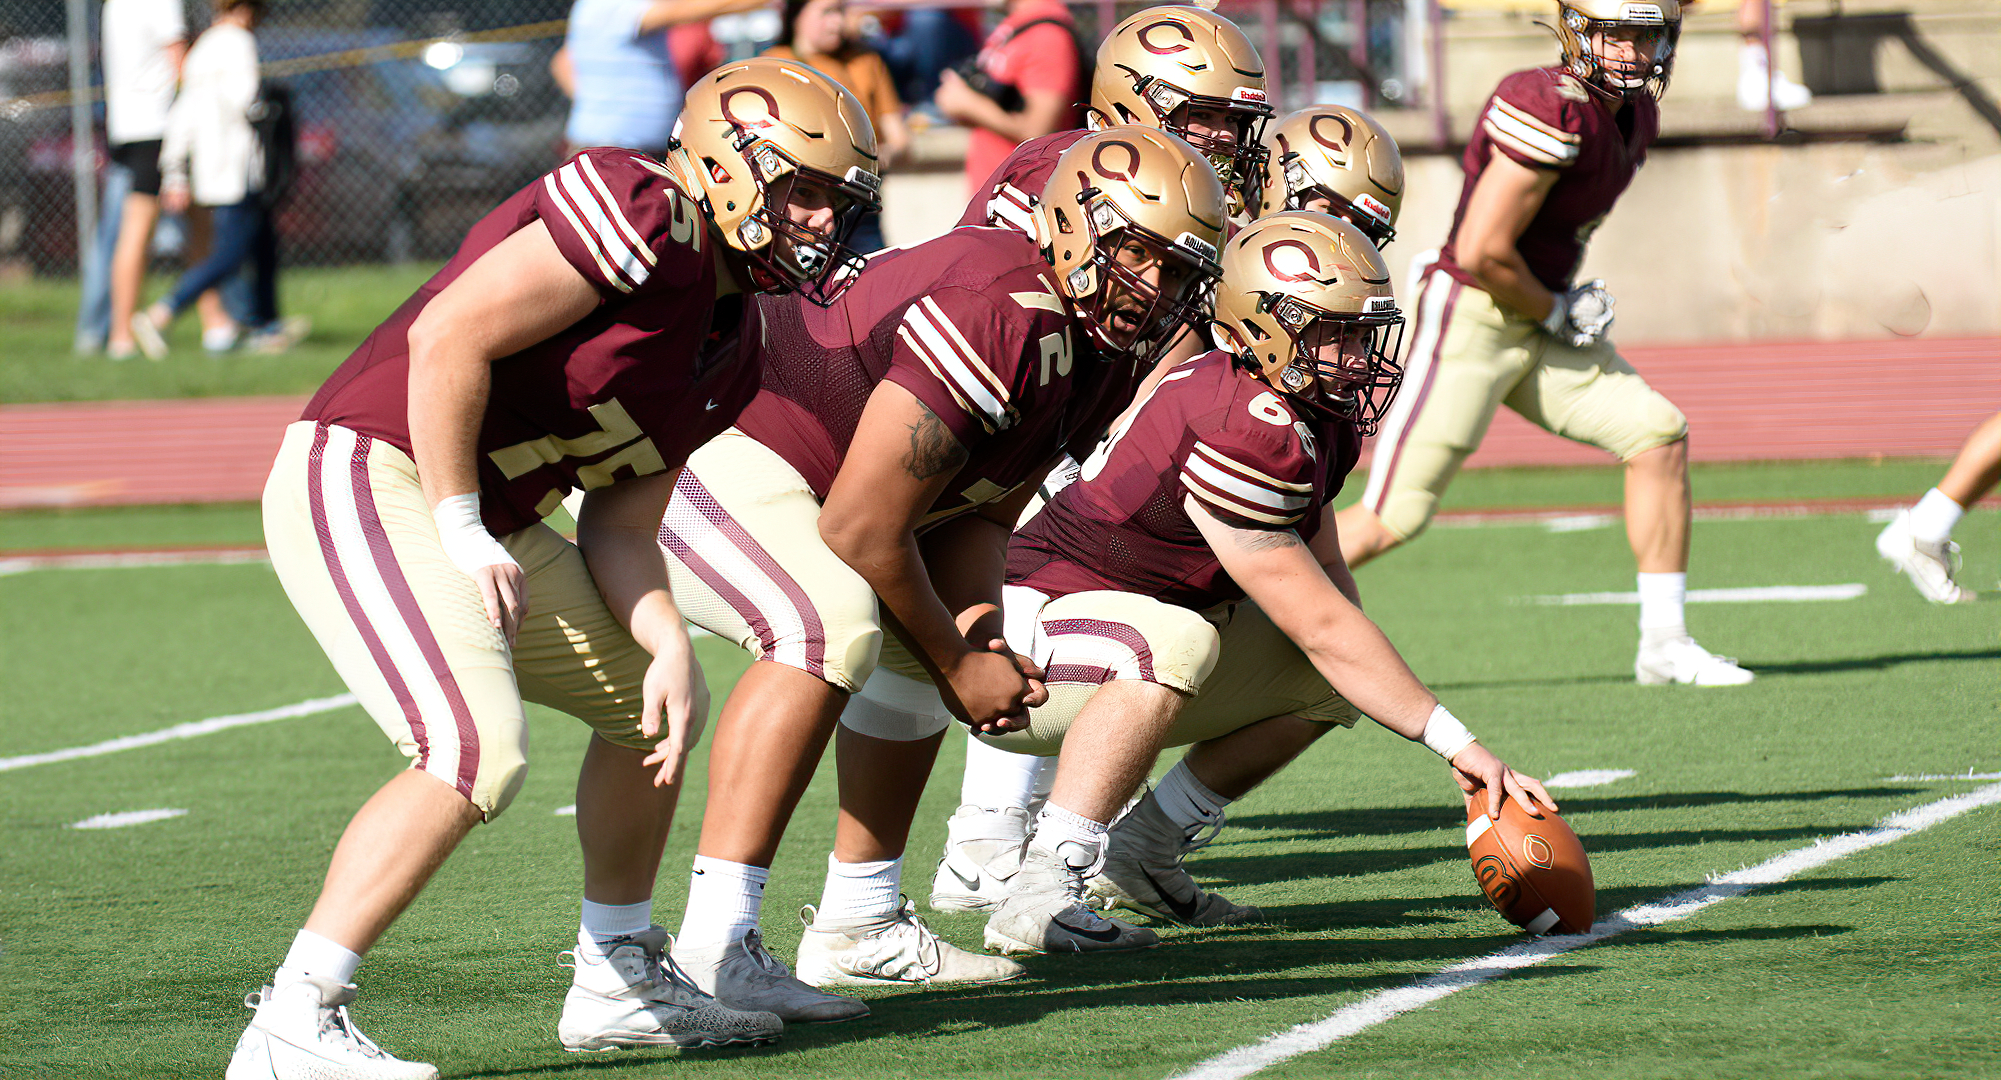 The Cobber offensive line cleared the way for 289 rushing yards in the team's 34-27 win over Macalester in the very first Skyline Division game.